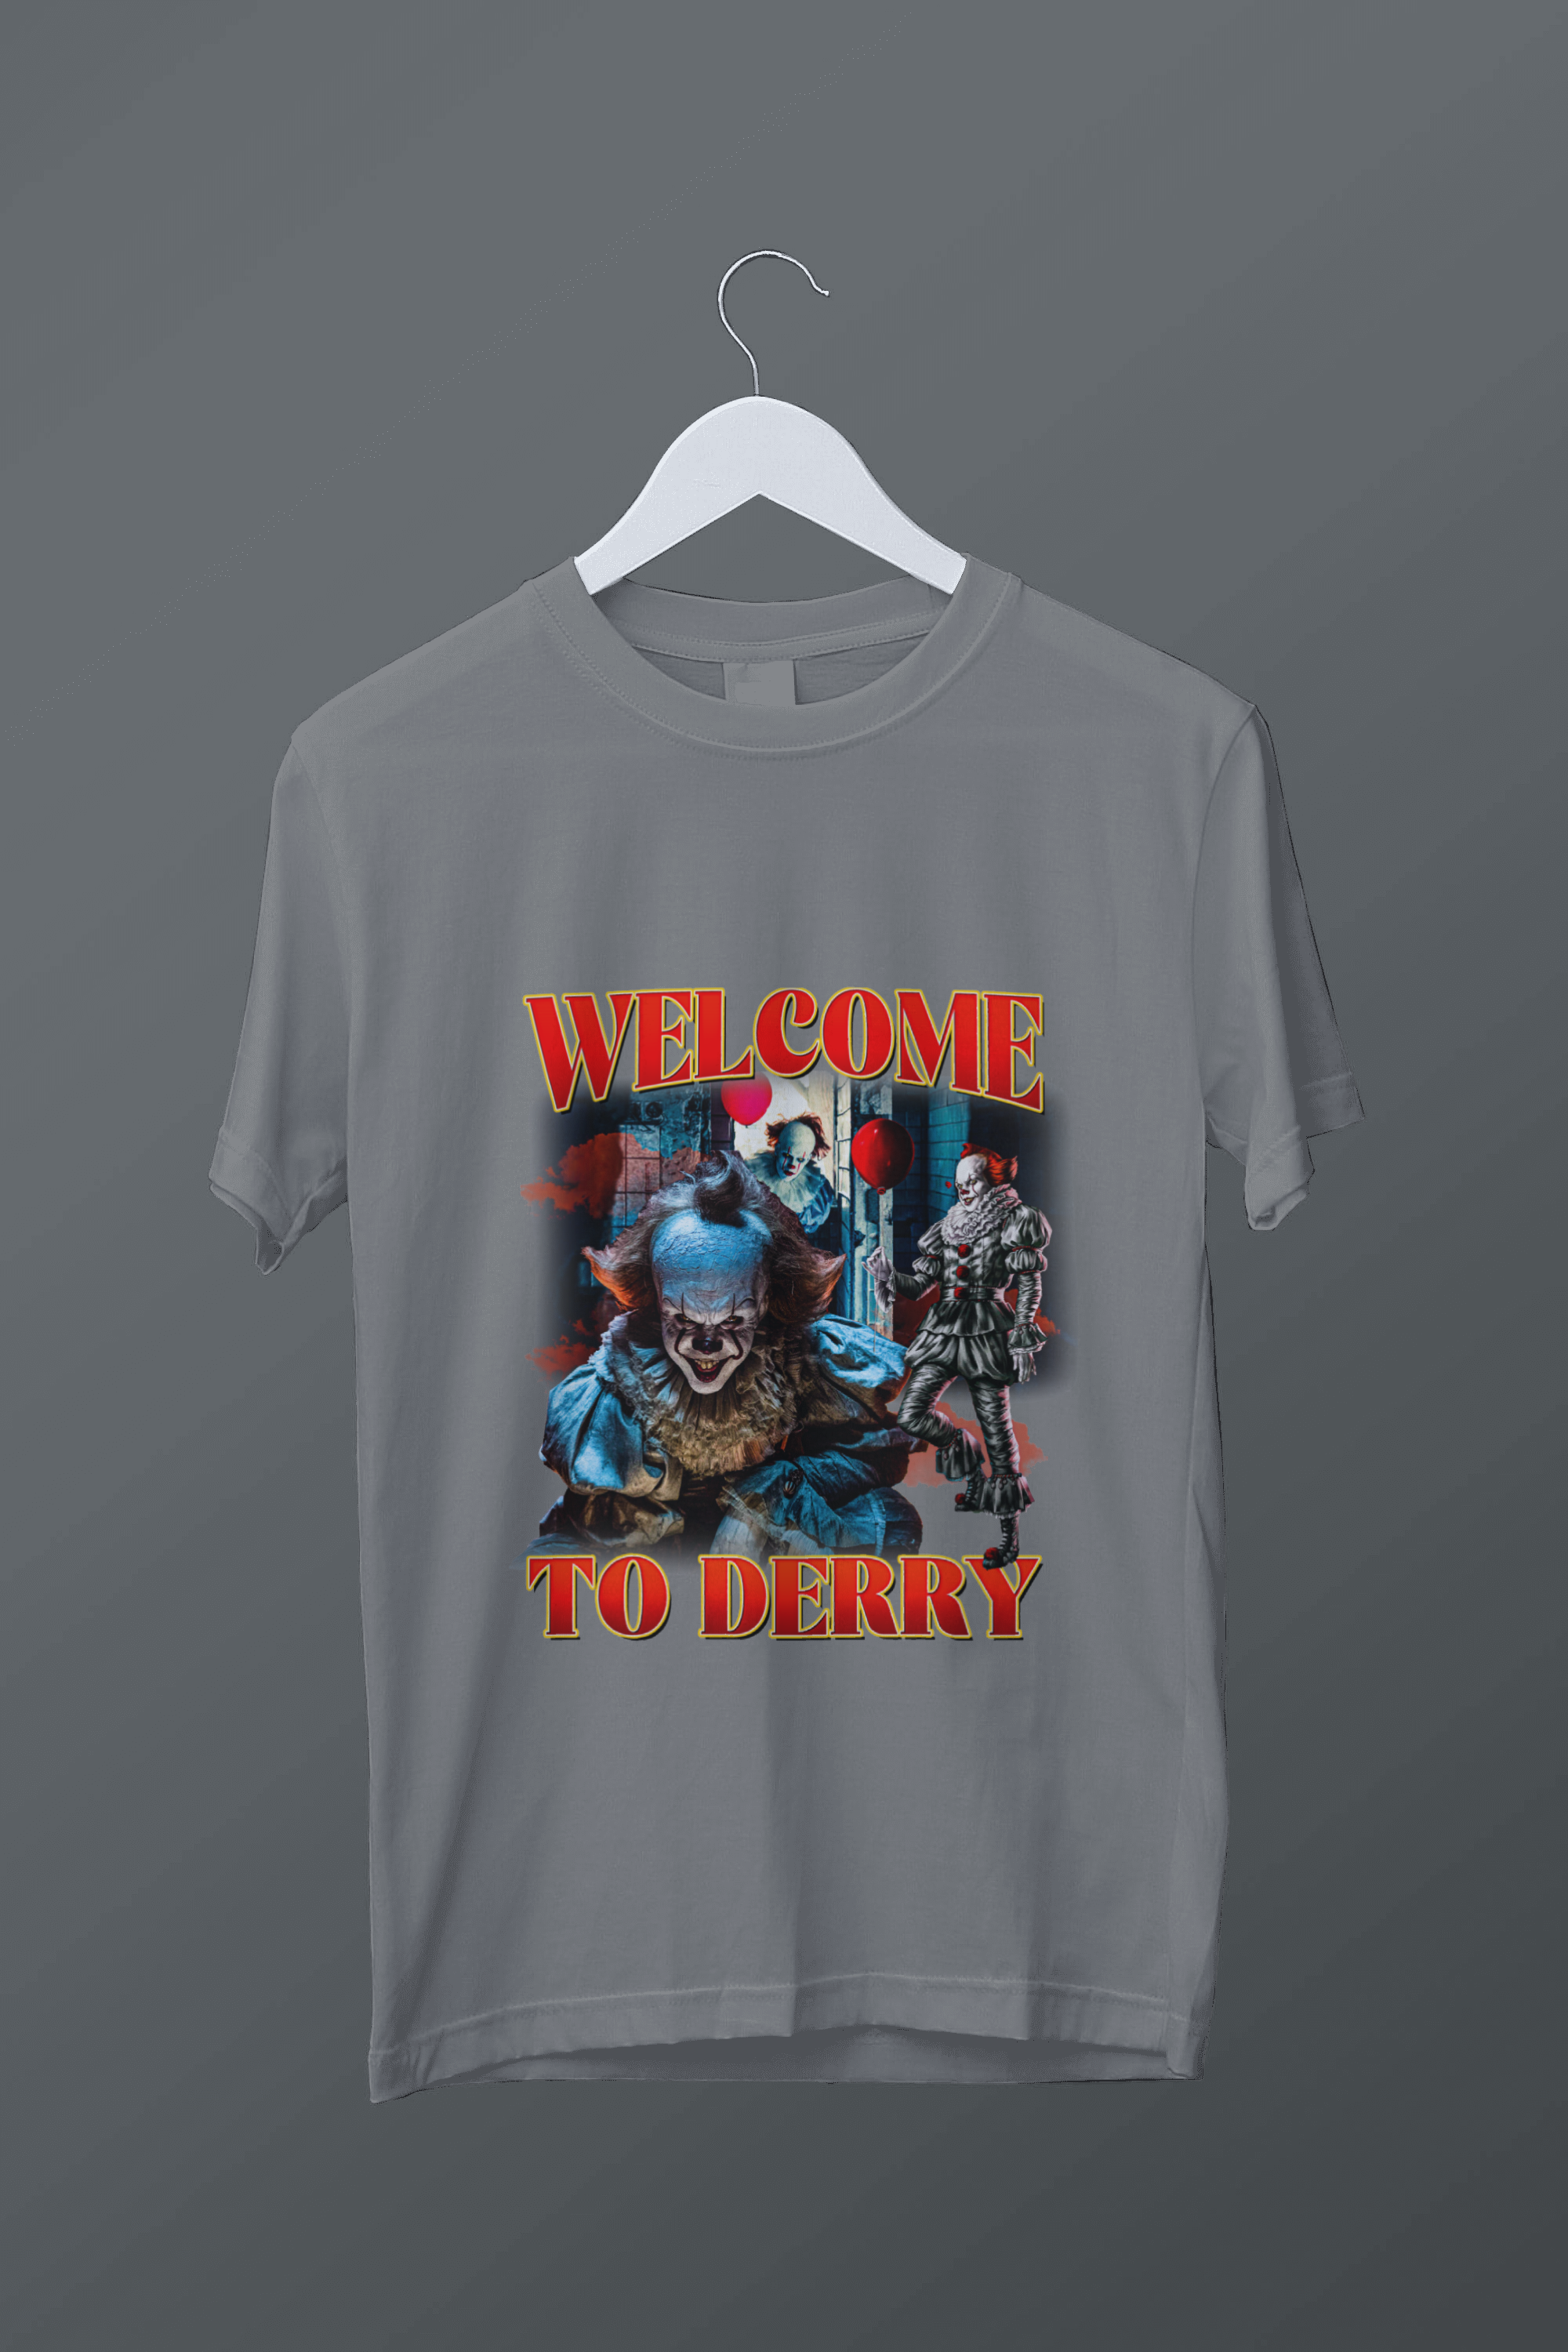 Welcome To Derry - Pennywise Horror Movie T-Shirt